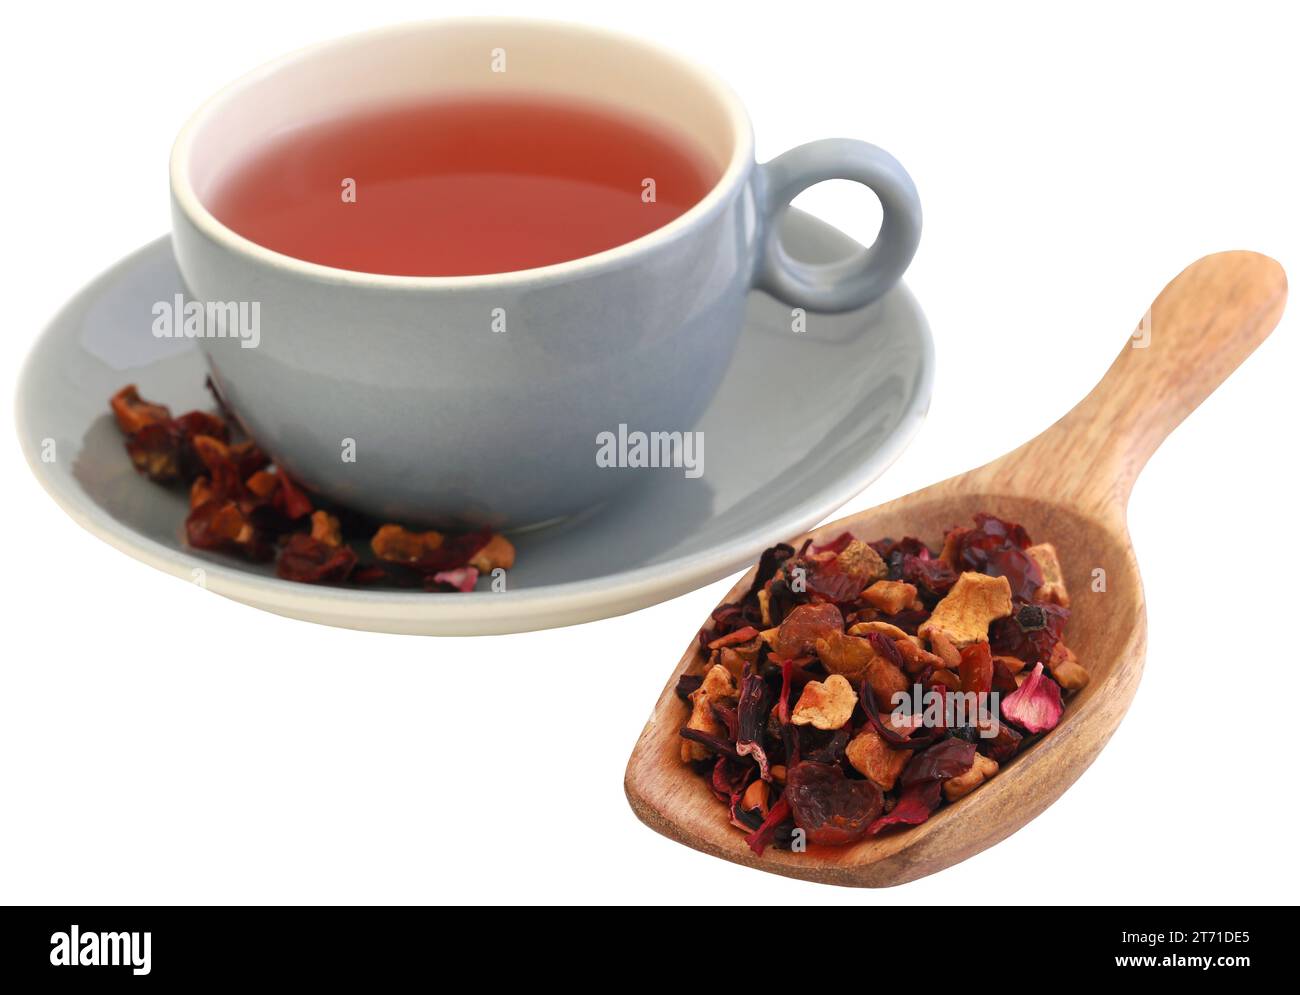 Herbal tea of roselle, rose hips and apple closeup and isolated Stock Photo